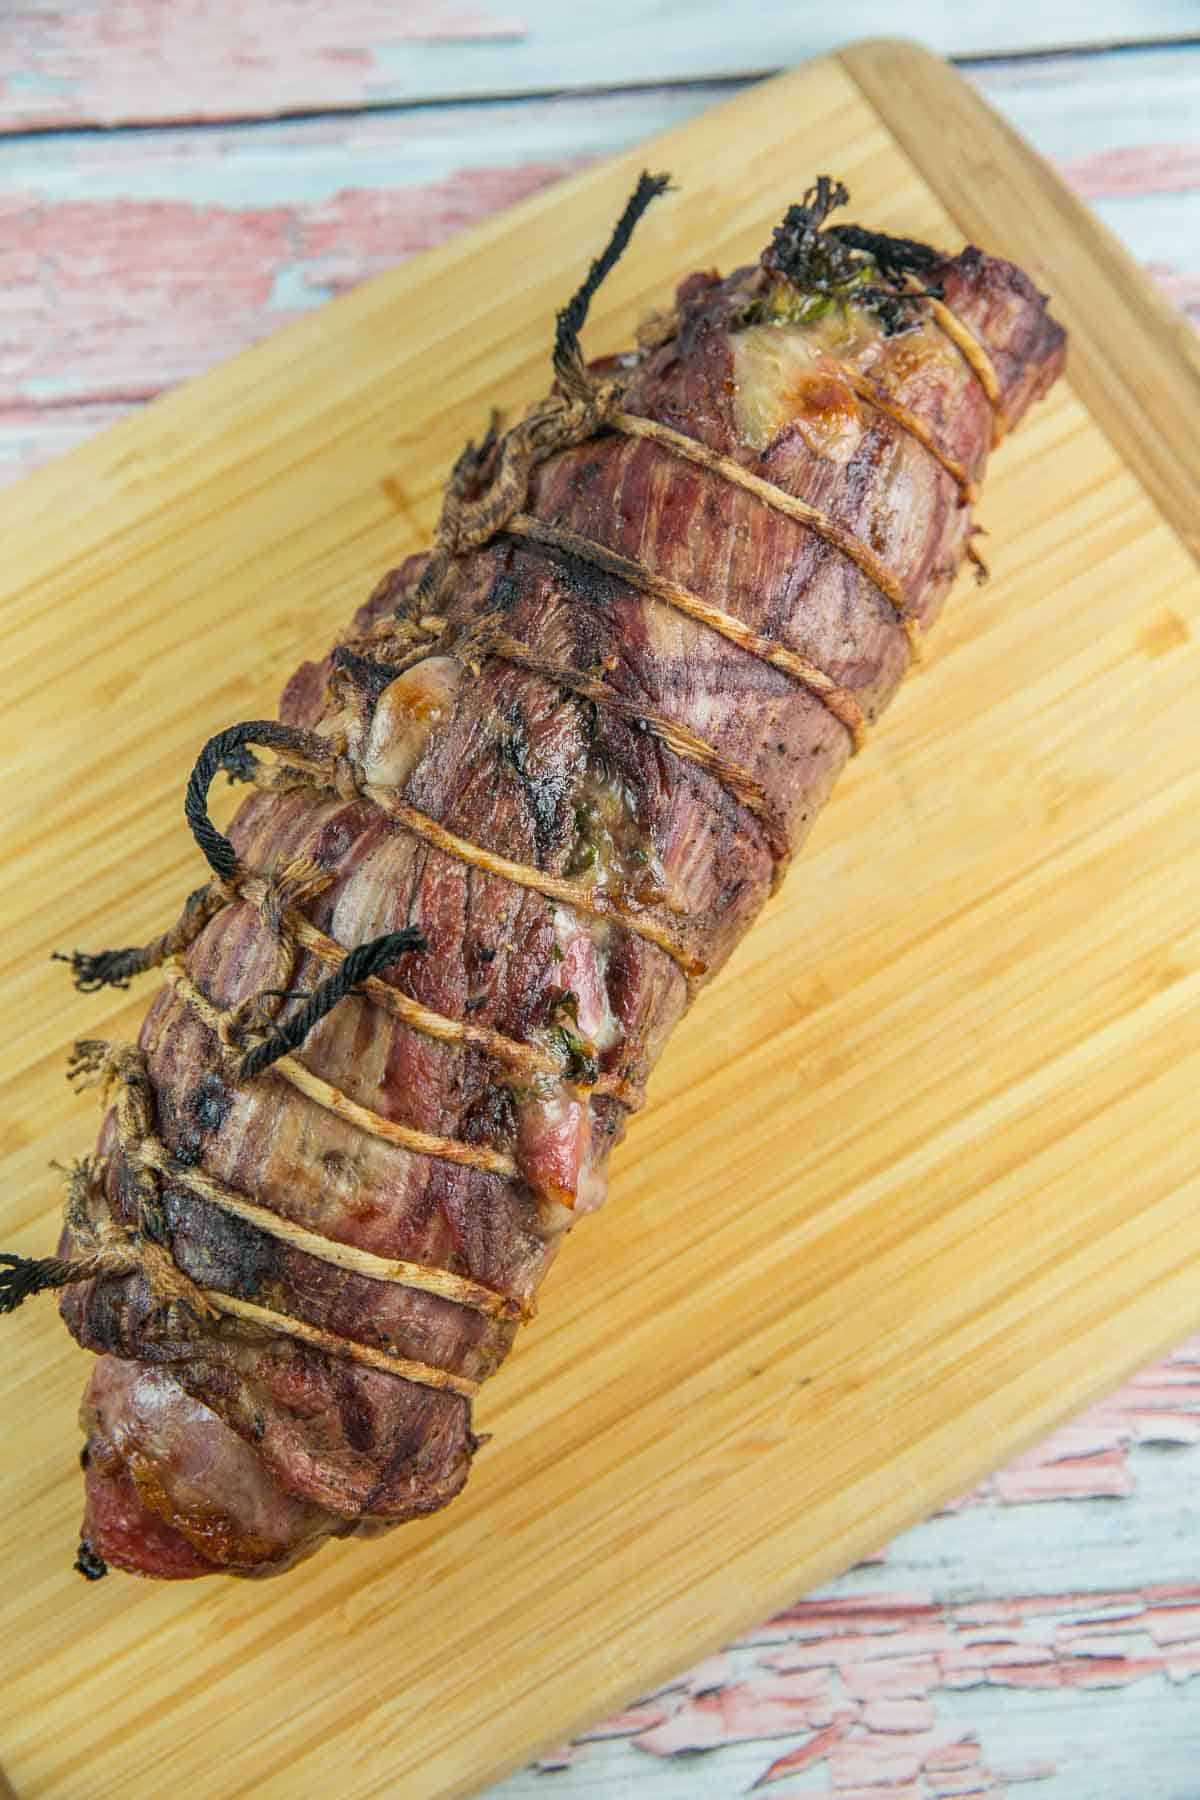 Italian Flank Steak Pinwheels: flank steak stuffed with salami and provolone, rolled tightly, and grilled. Go ahead, impress your friends - they don't have to know how easy this is. {Bunsen Burner Bakery} #flanksteak #steakpinwheels #grilling #dinner